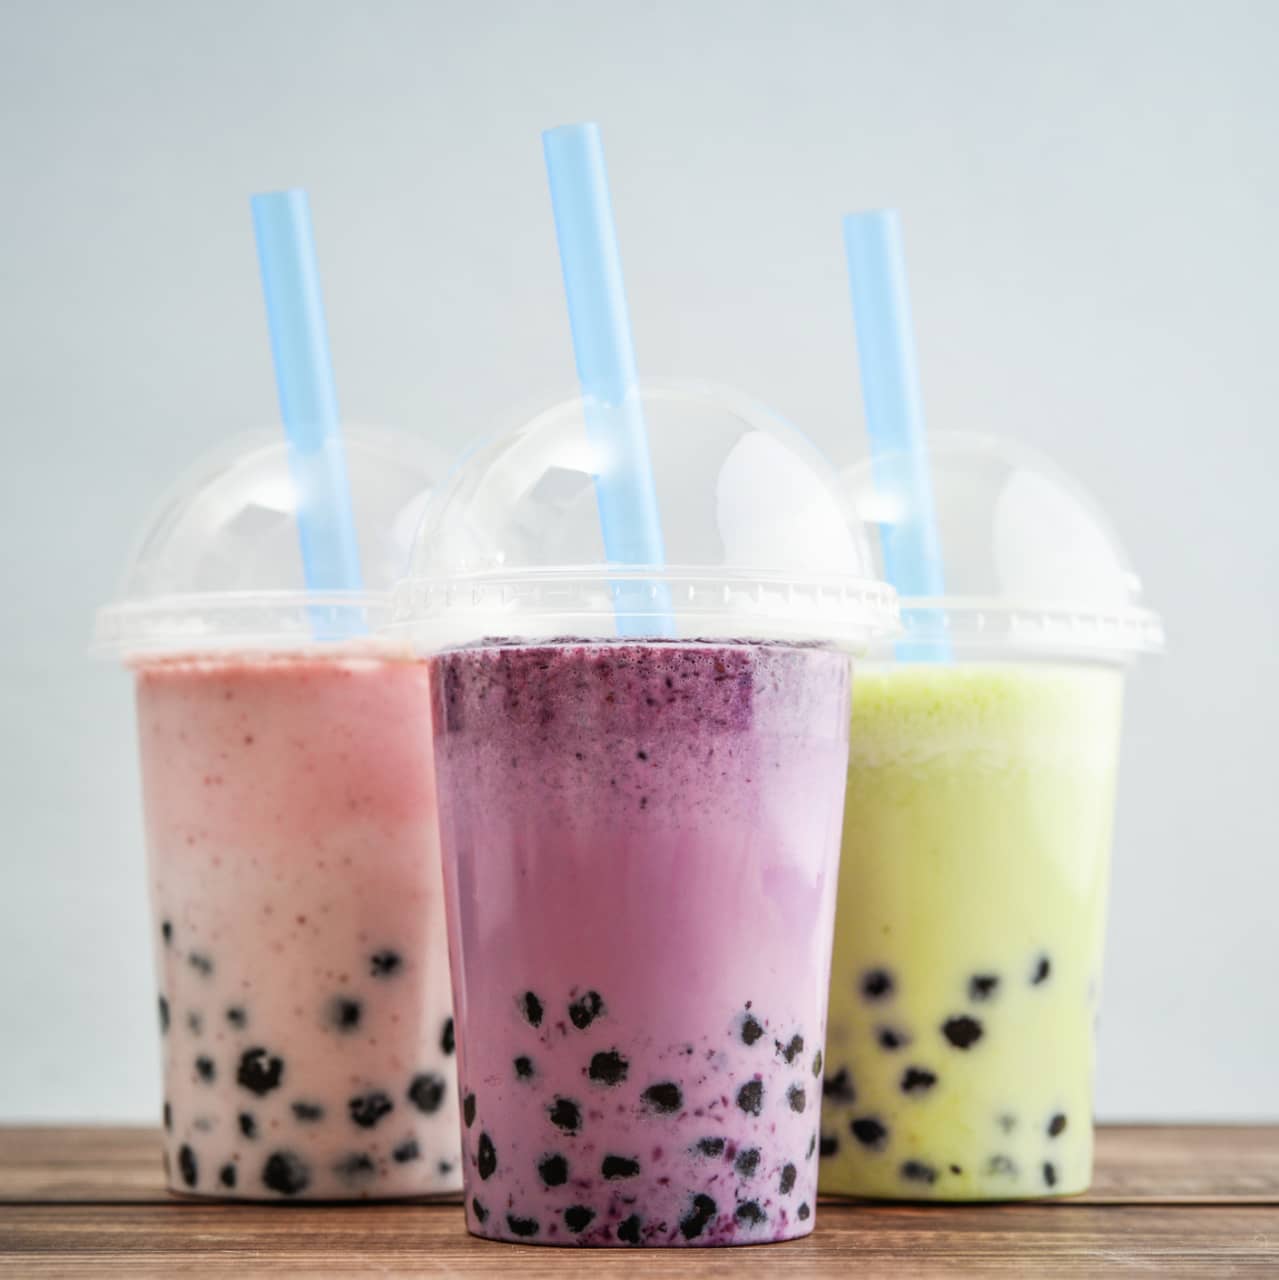 Brace yourselves, bubble-tea lovers: The U.S. faces a boba shortage that  may last months - MarketWatch